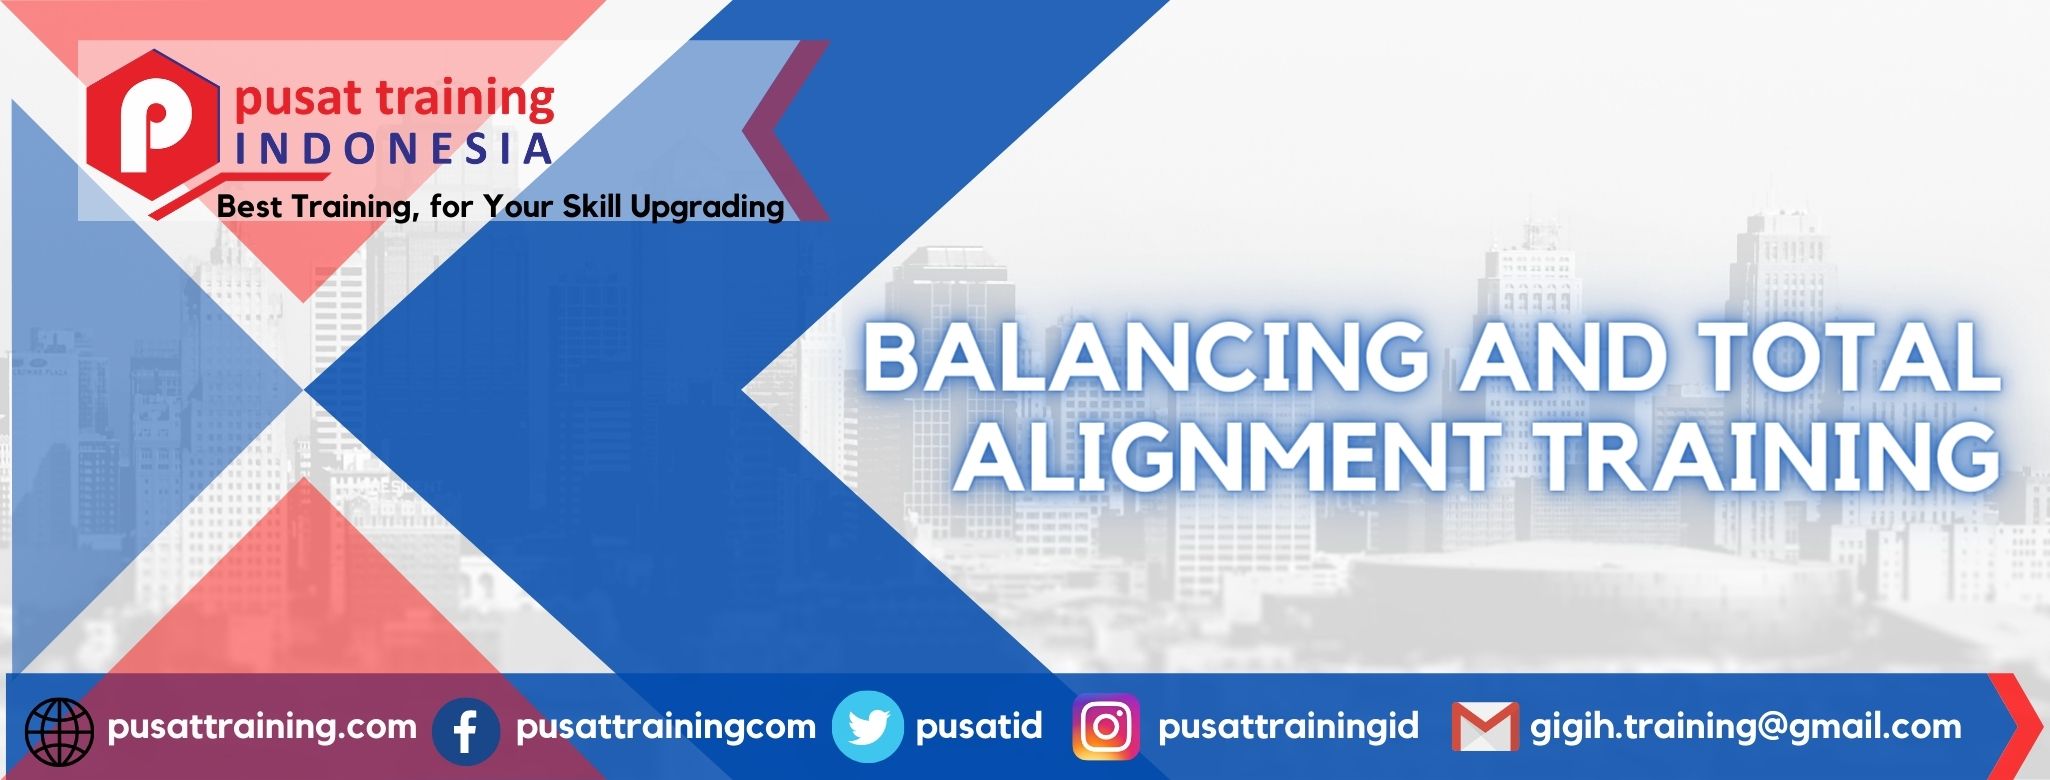 BALANCING AND TOTAL ALIGNMENT TRAINING